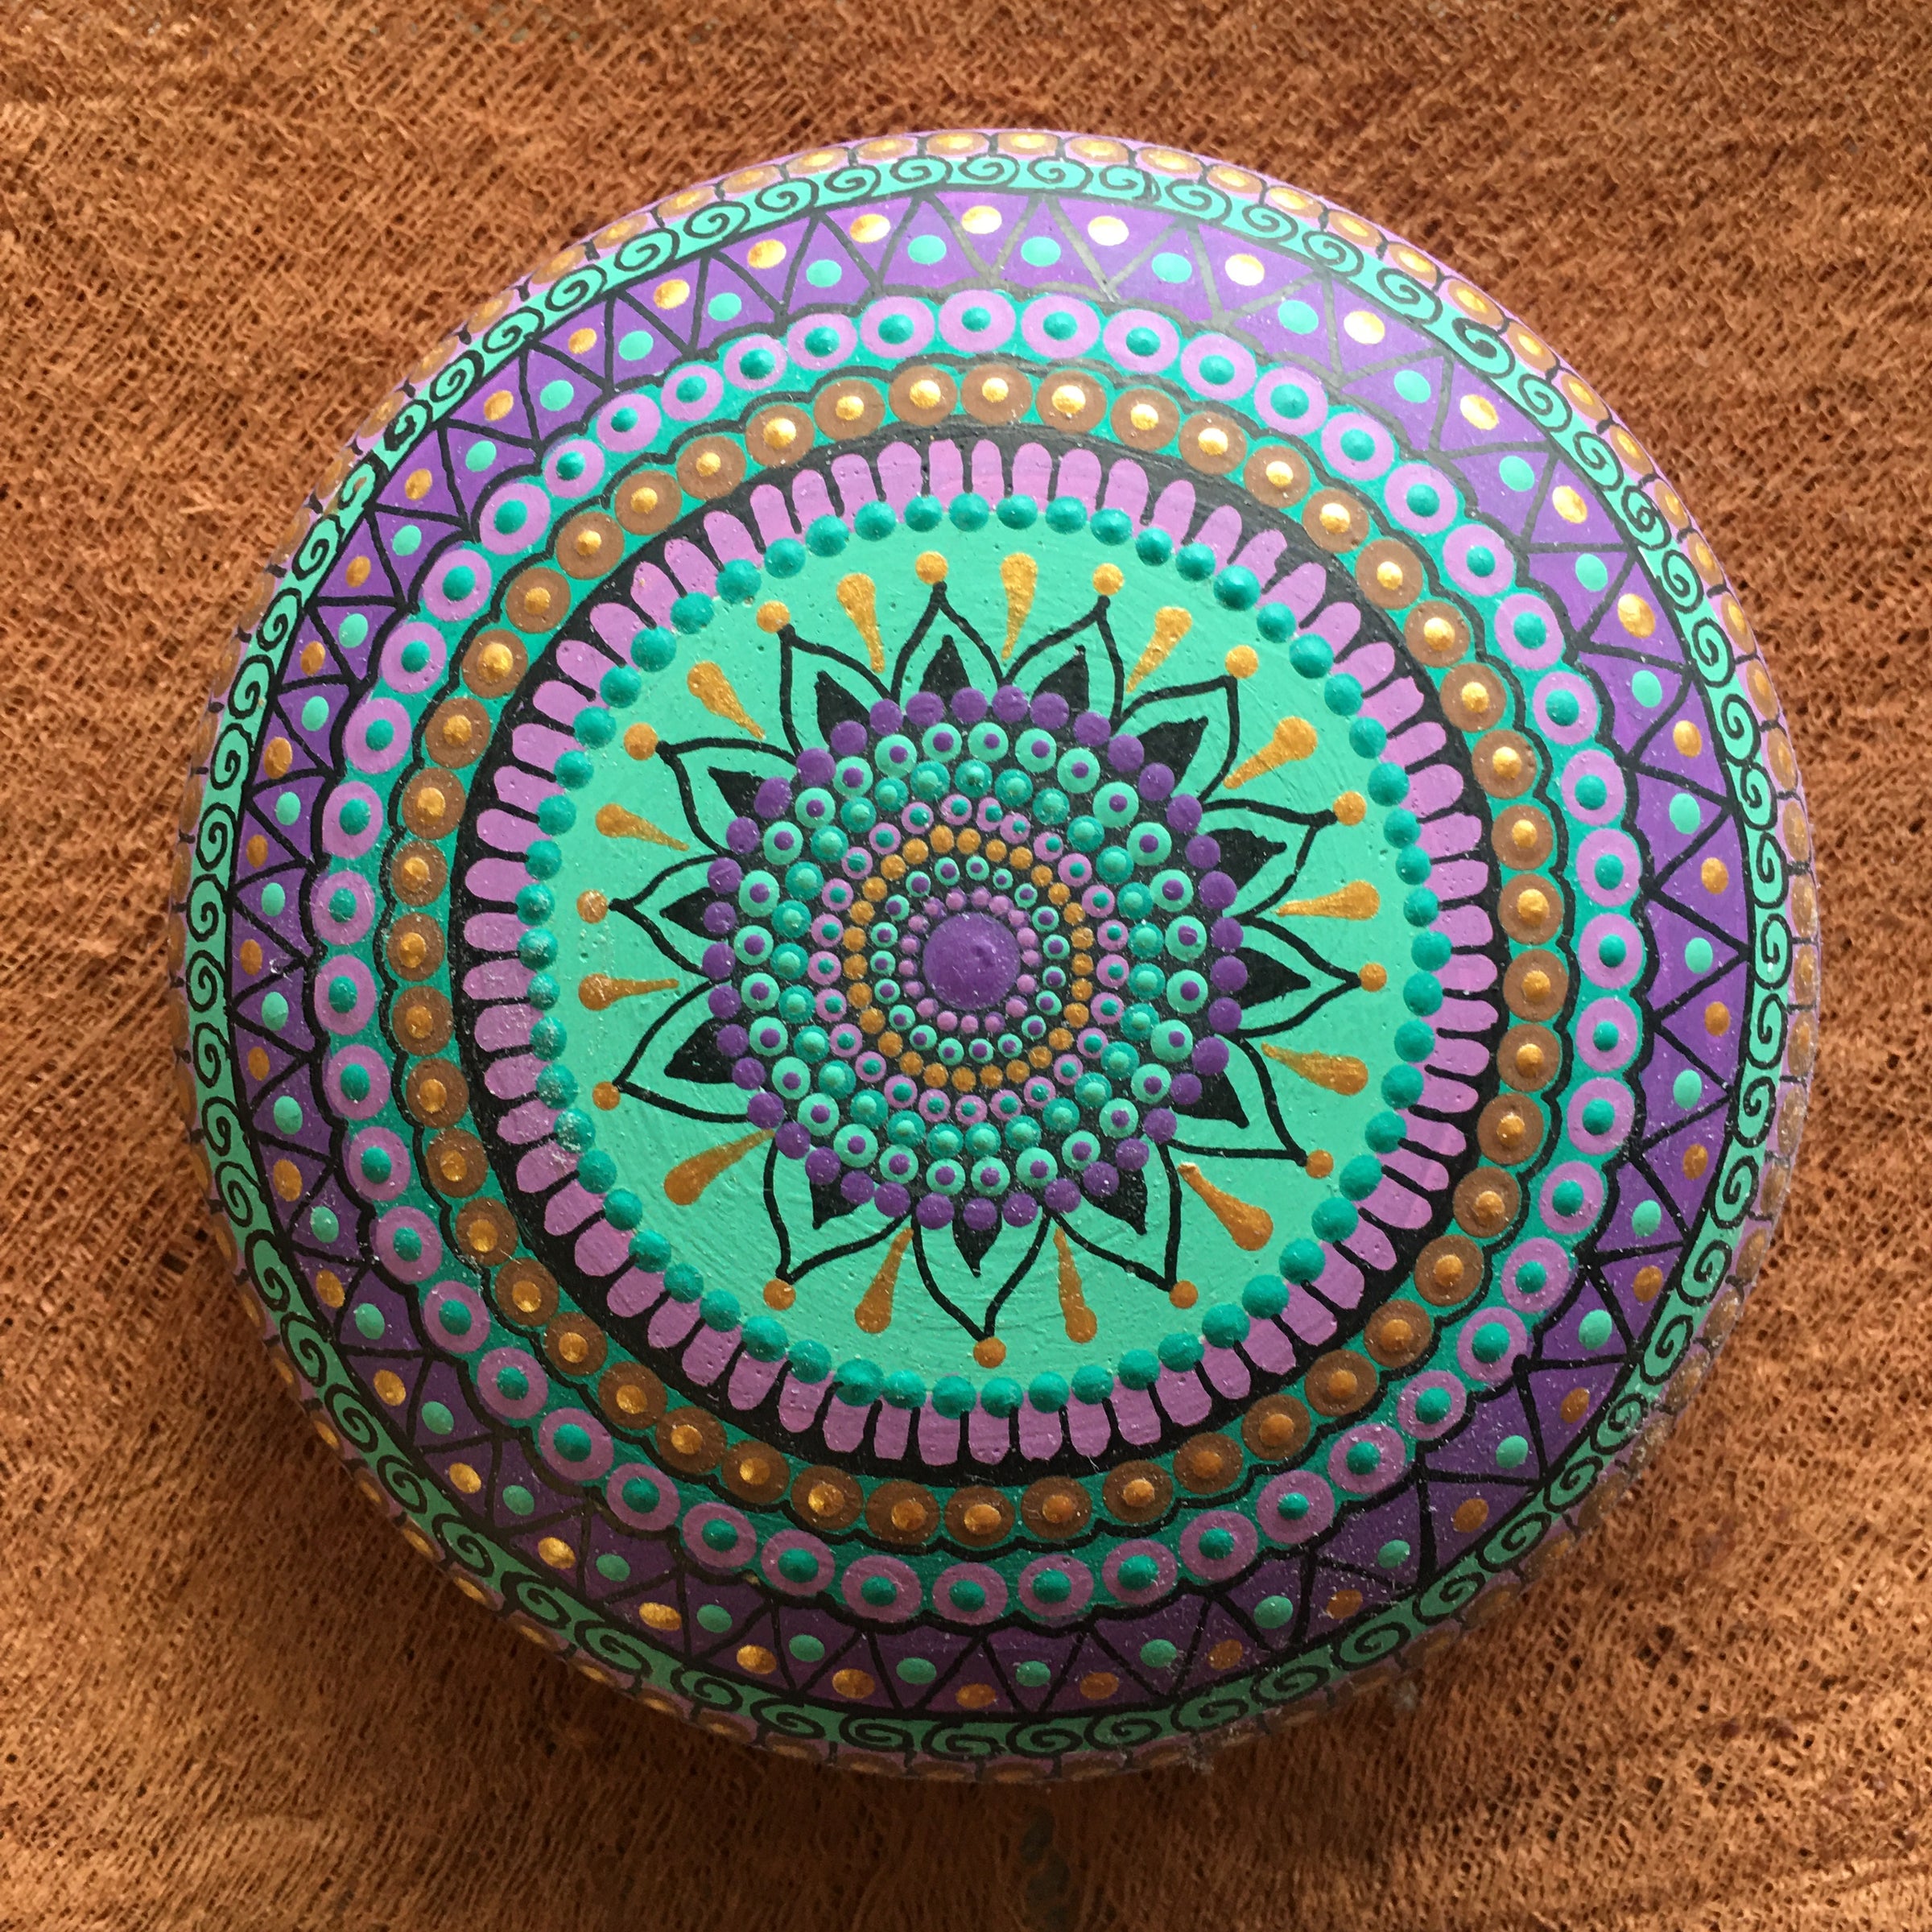 Large mandala stone on a sandy background with some plants